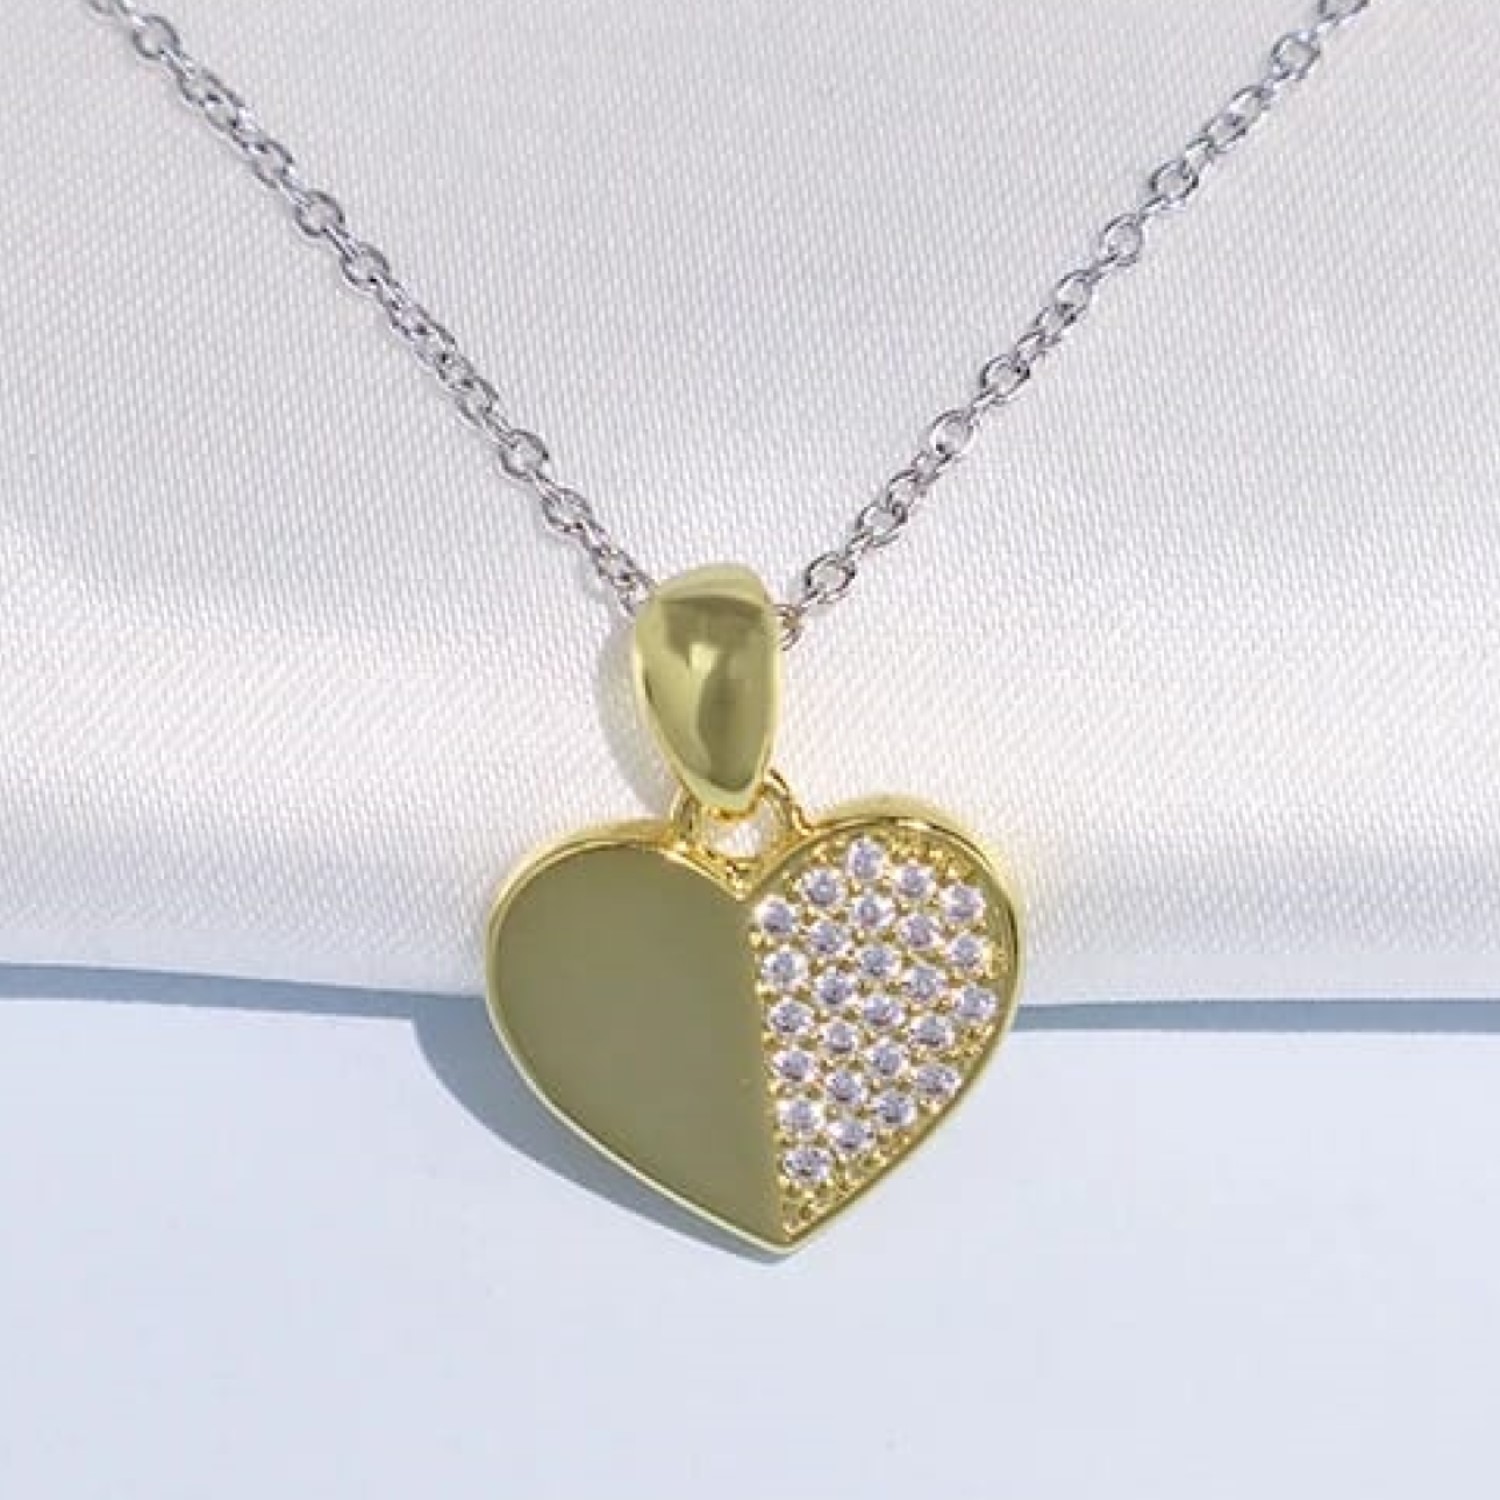 0.10 Carat Natural Round Cut Diamonds Heart Shaped Pendant 18 Inch Chain Included